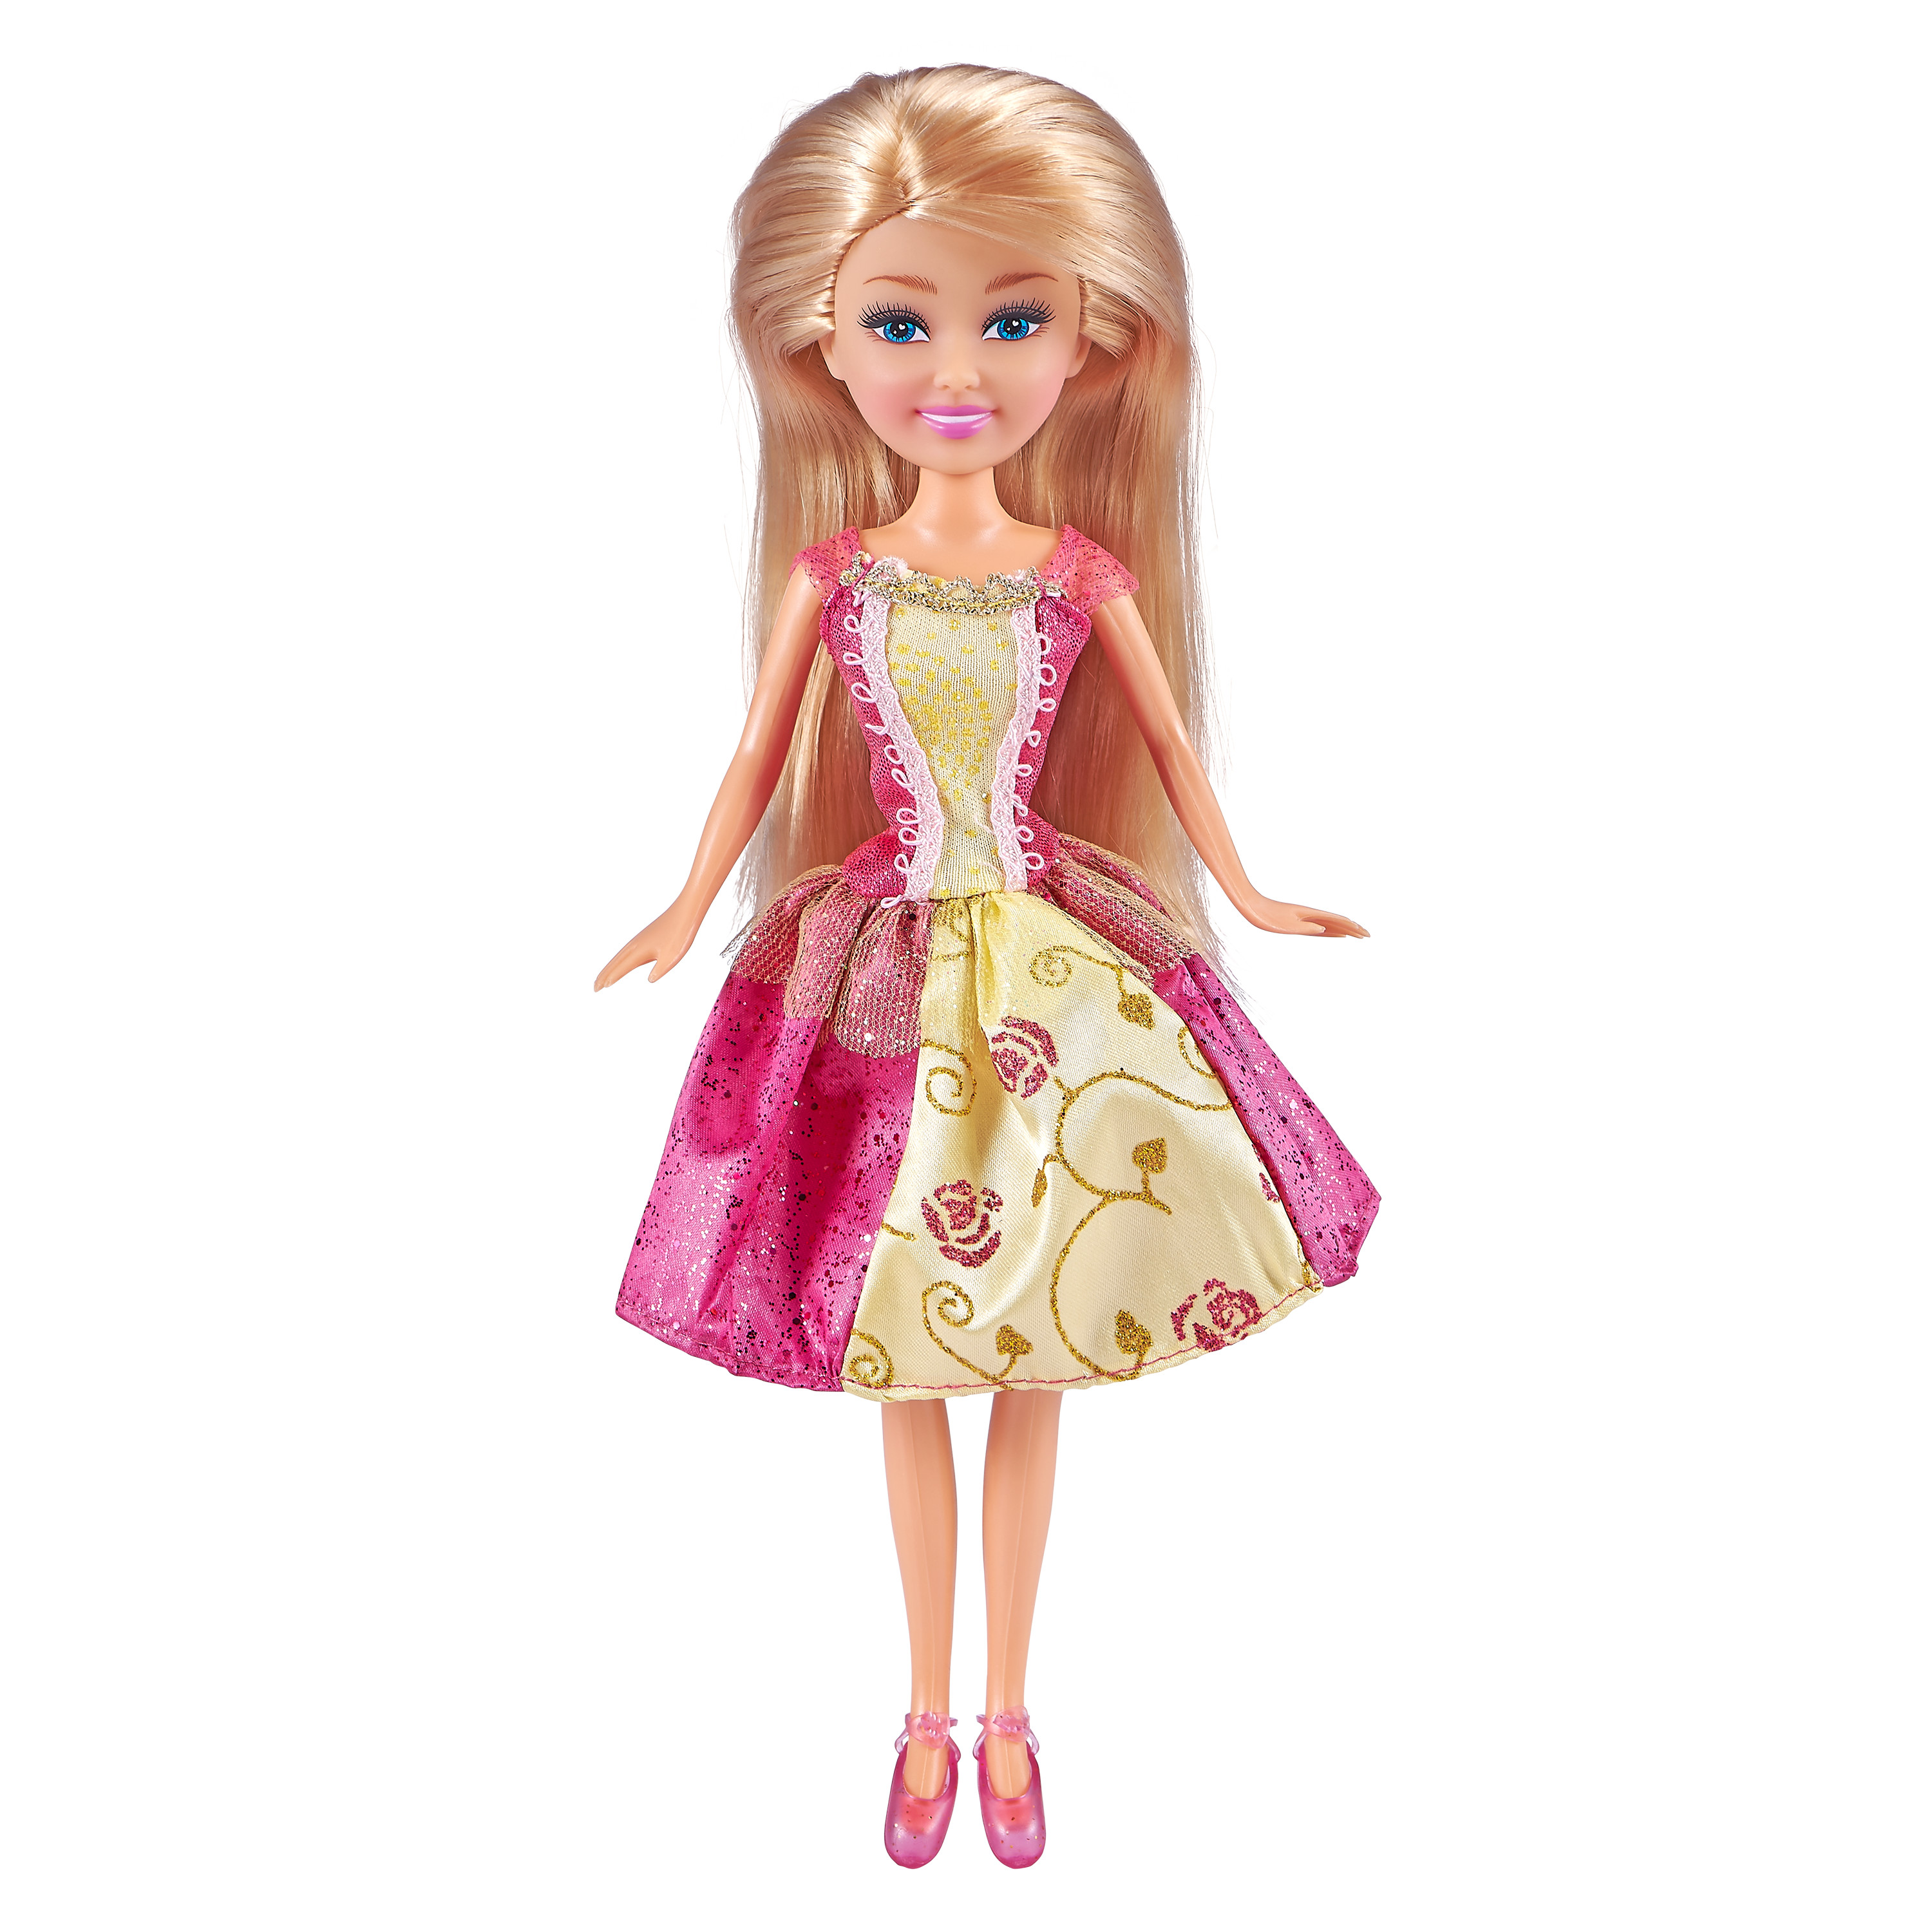 Sparkle Girlz Mini Cone Doll 10.5" Height Pink by Zuru Ages 3 - 99 - image 5 of 6